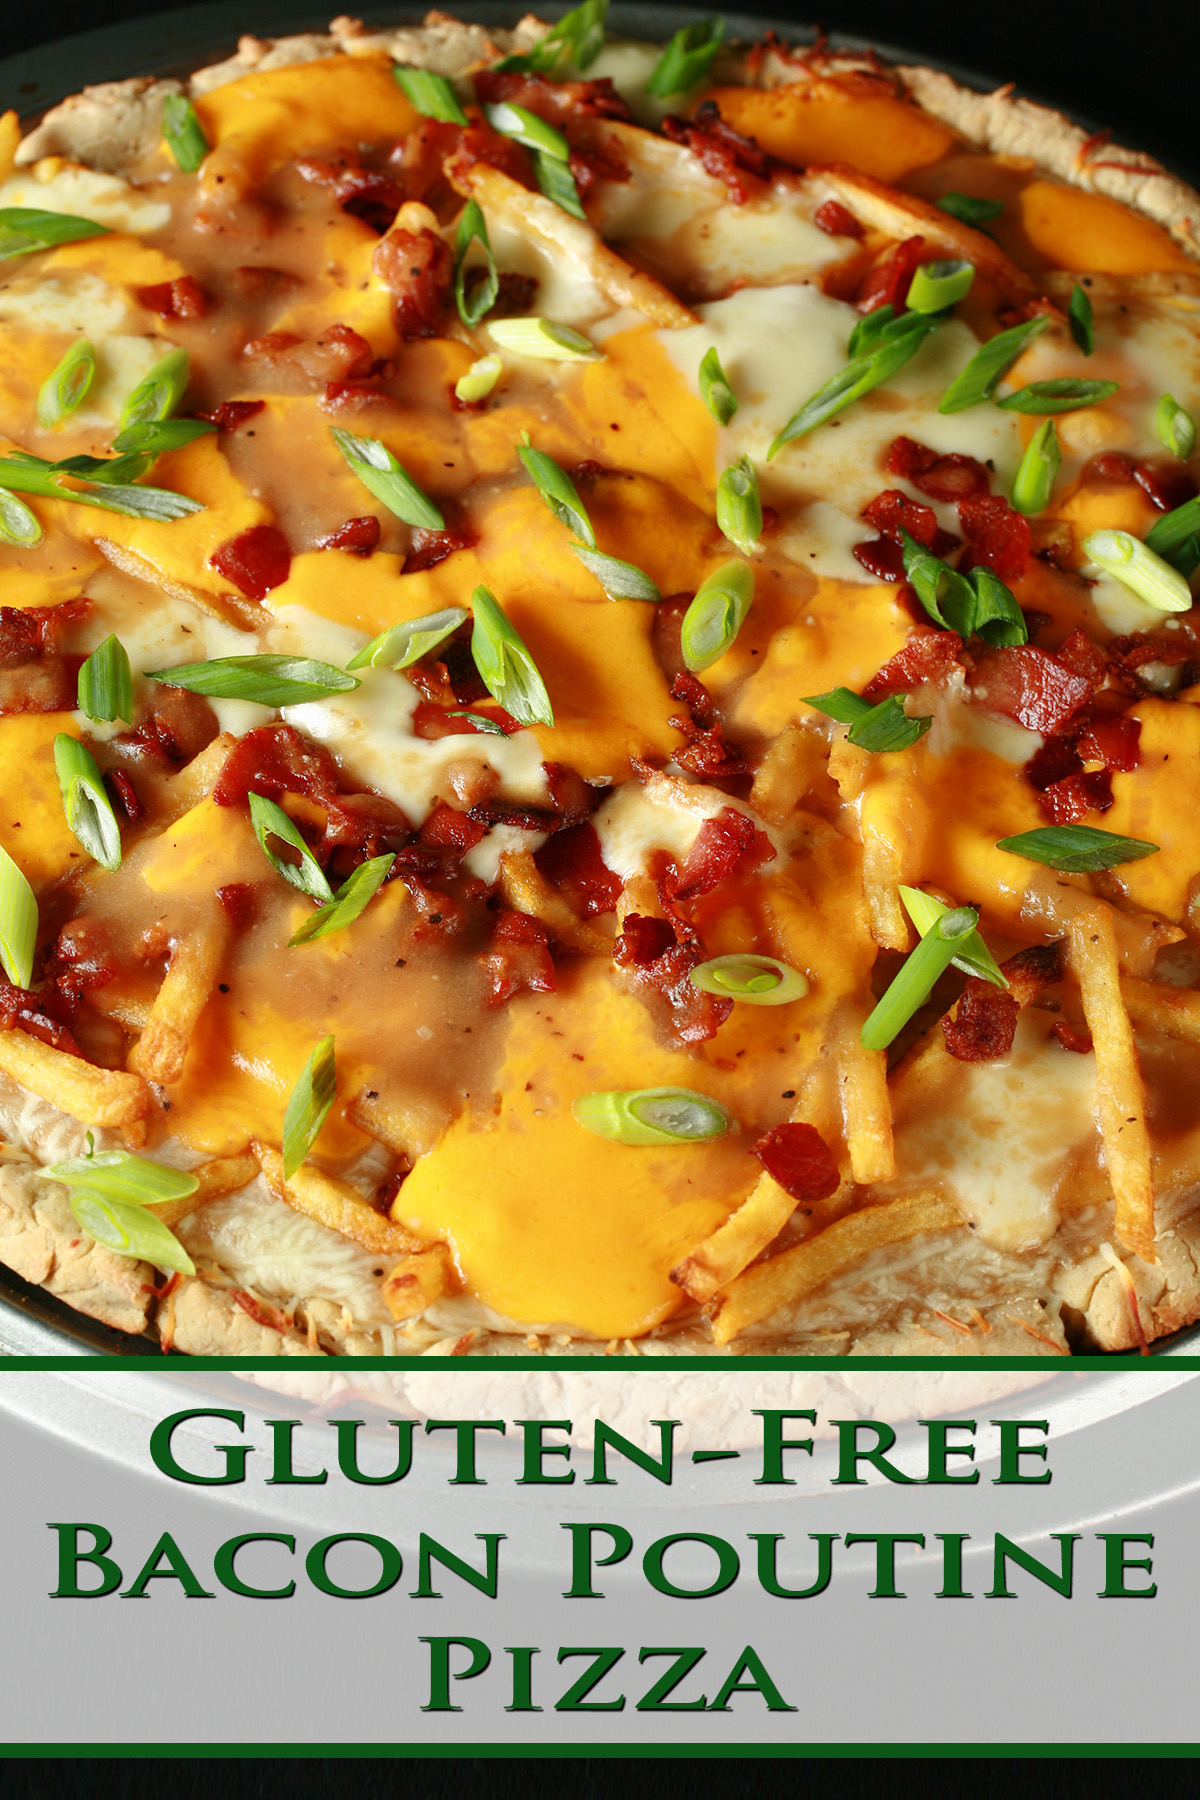 A close up view of a gluten-free bacon poutine pizza - A pizza crust topped with gravy, fries, cheese curds, chredded cheese, bacon, and green onions!